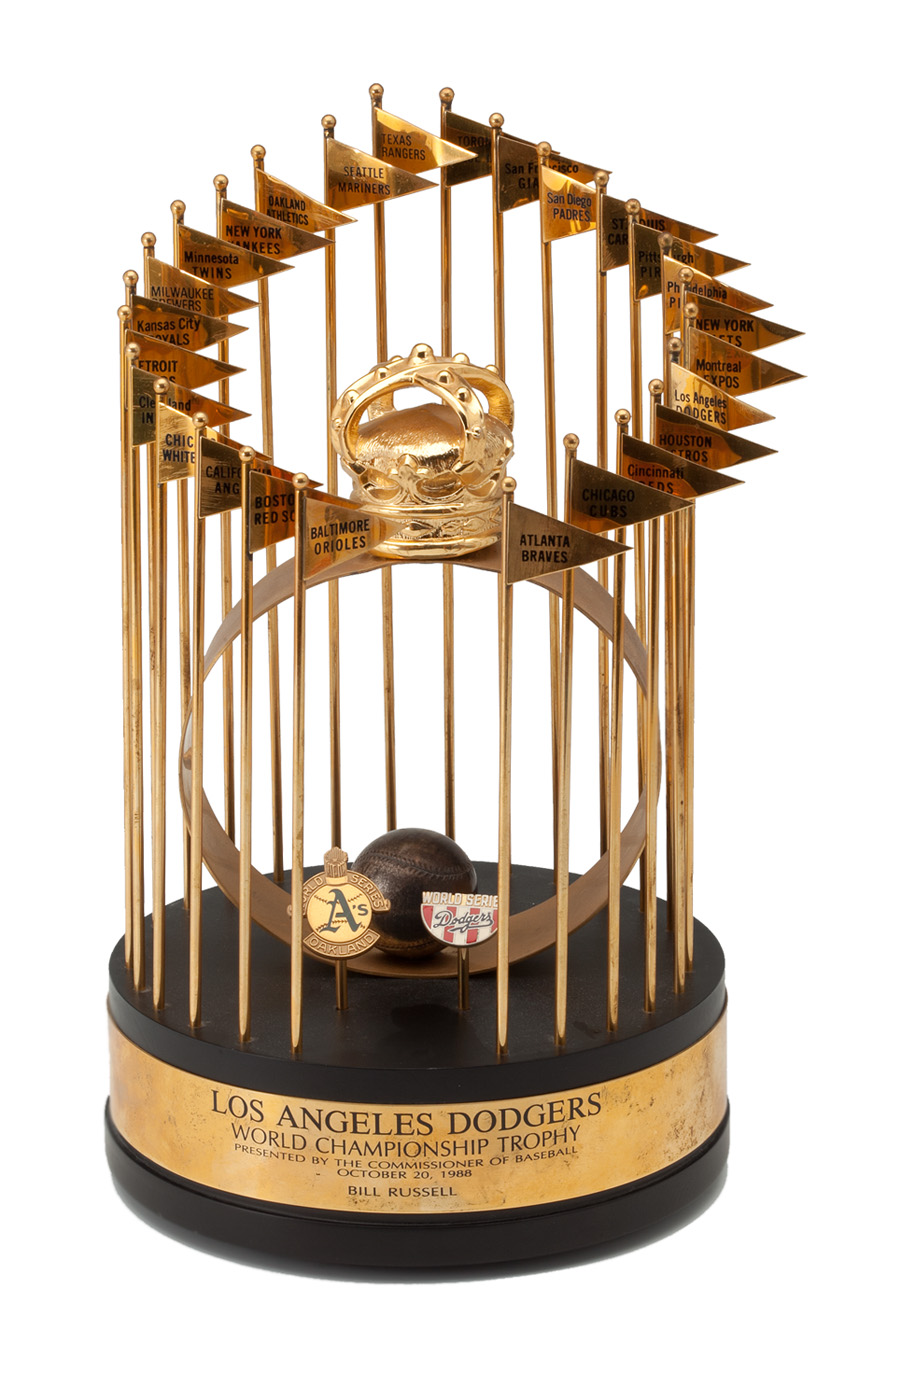 Los Angeles Dodgers 1981 World Series Trophy for Sale in Rowland